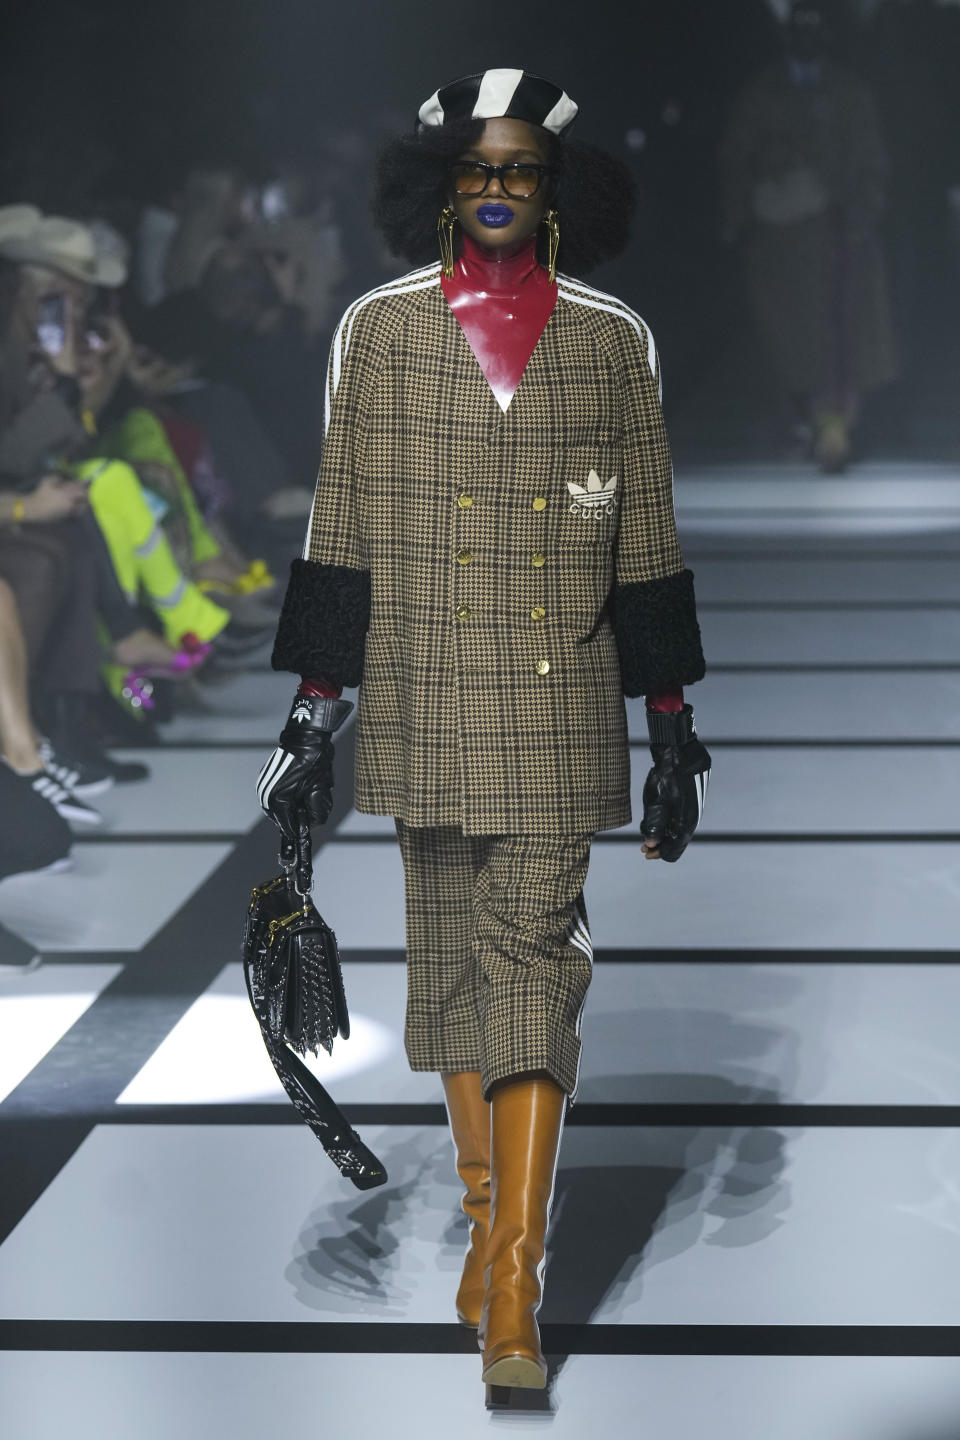 FILE A model wears a creation as part of the Gucci Fall/Winter 2022-2023 fashion collection, unveiled during the Fashion Week in Milan, Italy, Friday, Feb. 25, 2022. Alessandro Michele is leaving his role as creative director of the Gucci, the fashion house announced Wednesday, Nov. 23, 2022 bringing an end to an eight-year tenure that sharply redefined Gucci’s codes with romanticism and gender-fluidity, all the while powering revenues for the Kering parent. (AP Photo/Antonio Calanni, File)